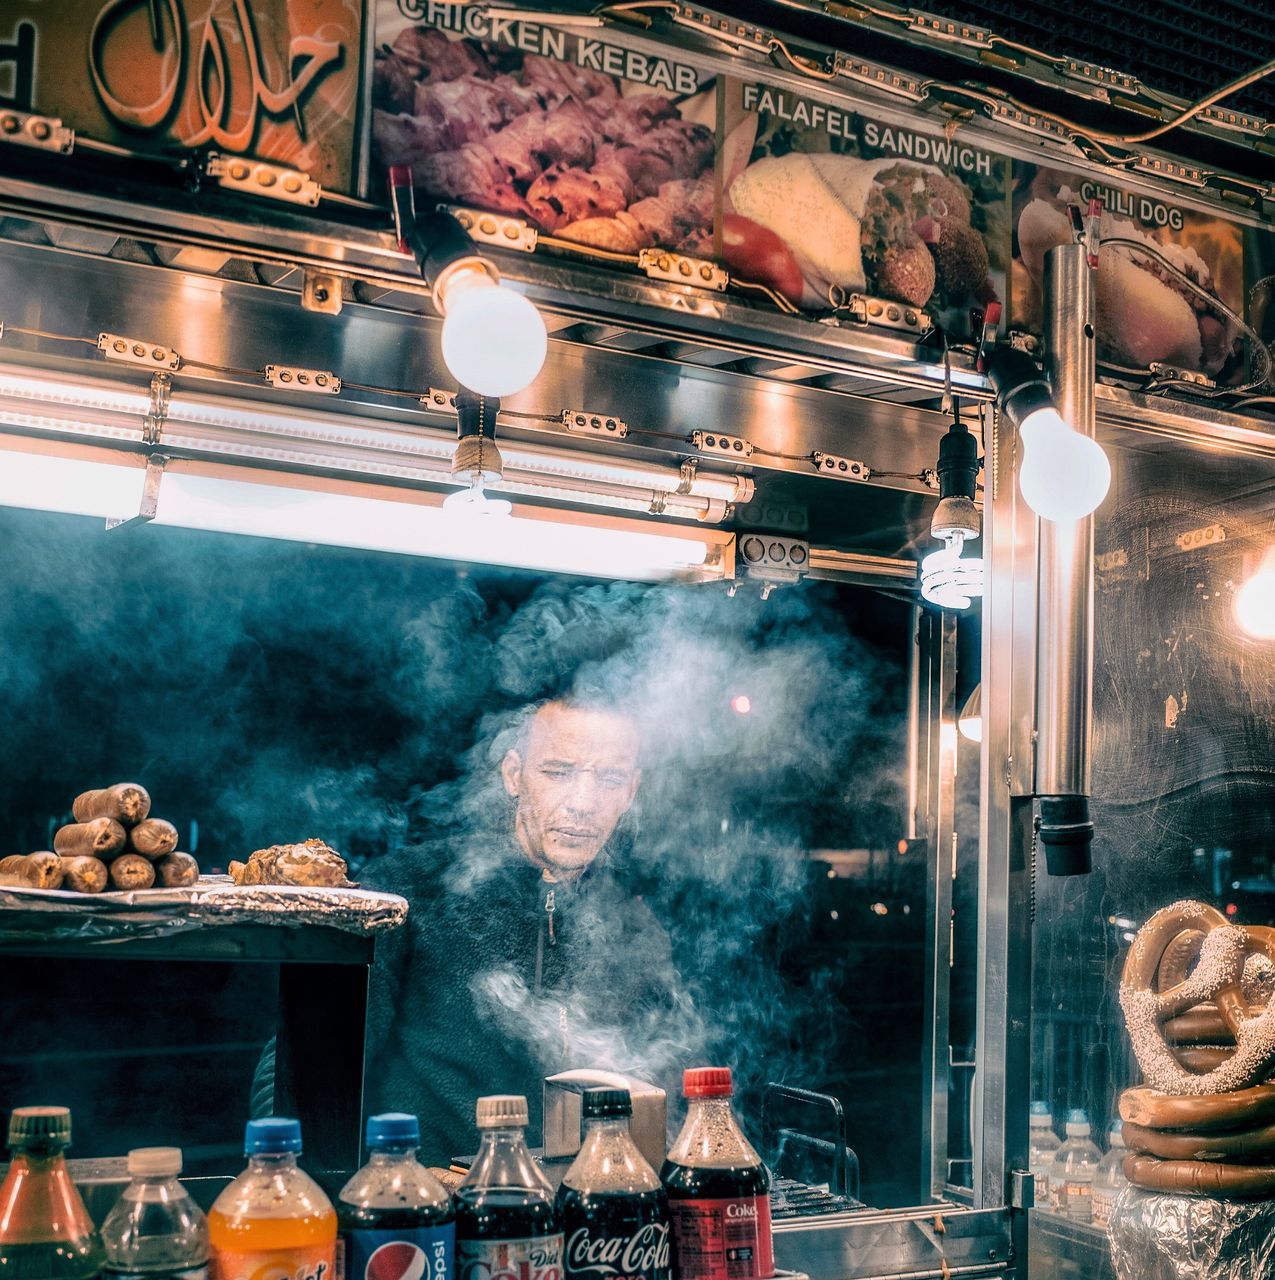 smoke - physical structure, indoors, food and drink, glass - material, one person, restaurant, container, food, illuminated, store, jar, transparent, real people, business, shelf, large group of objects, men, household equipment, motion